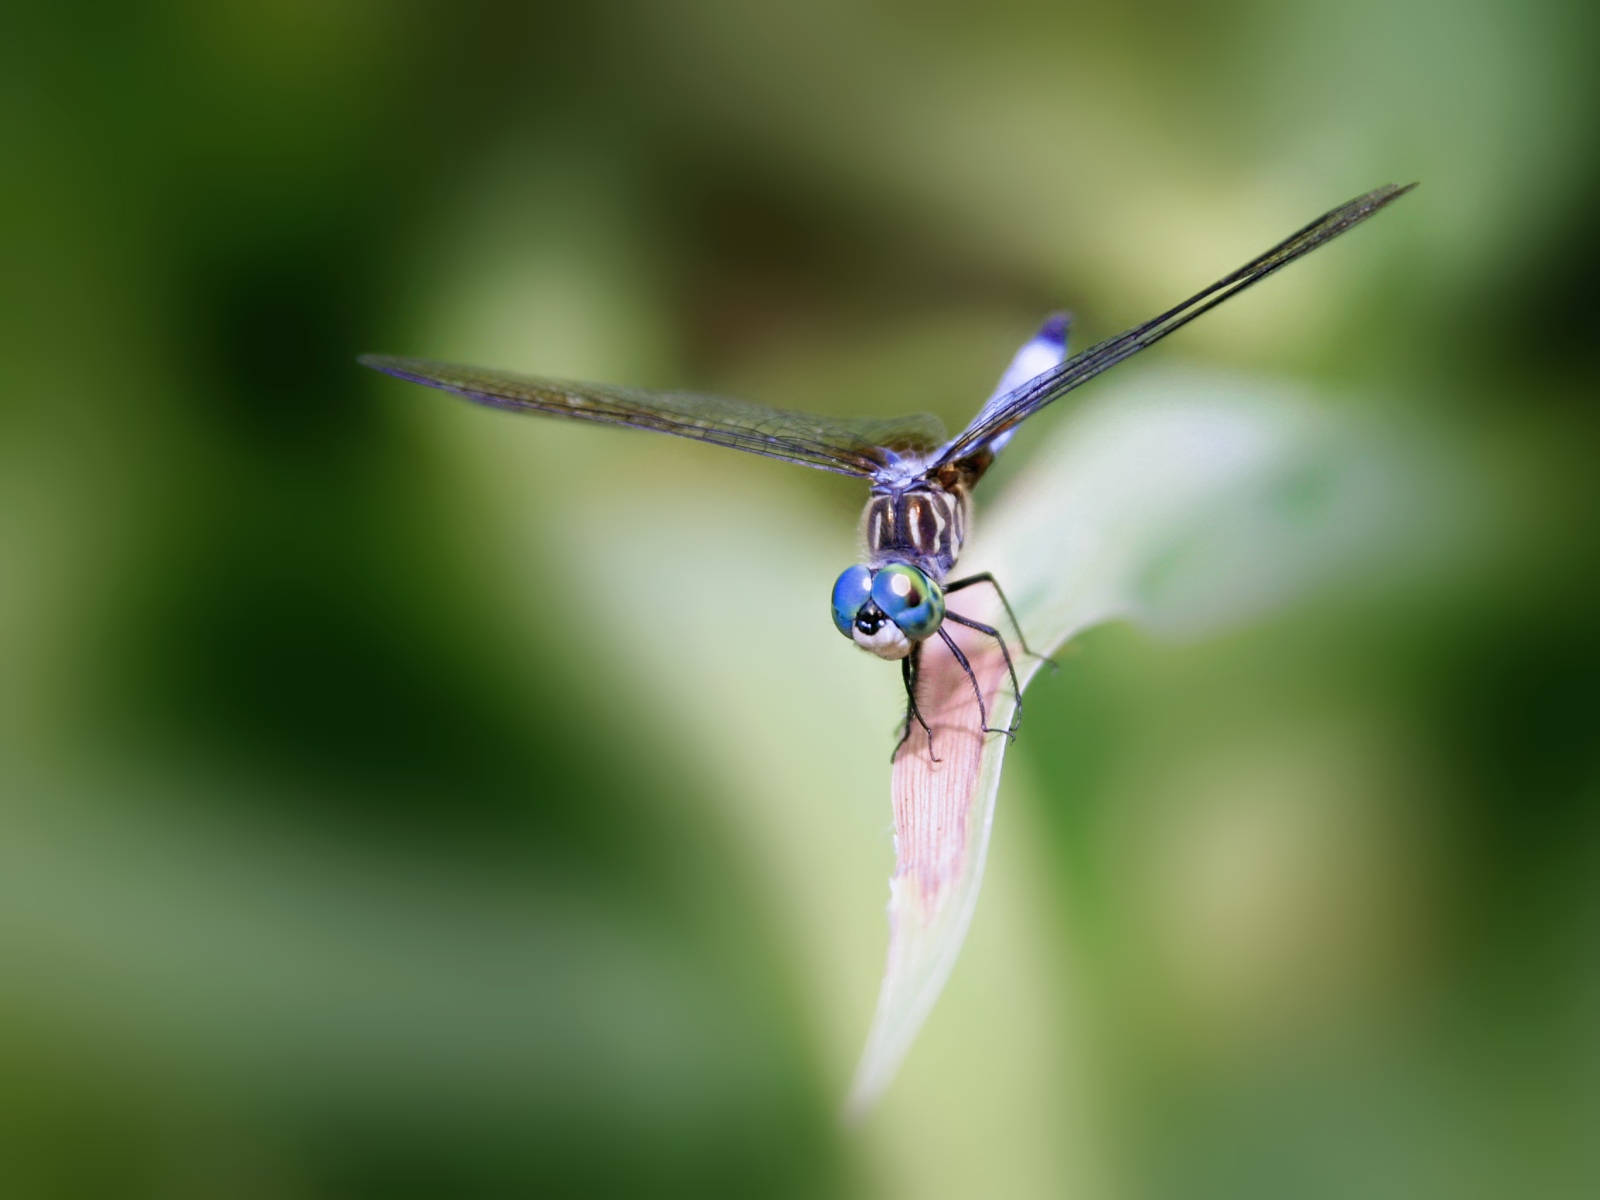 Insect Dragonfly With Thin Black Wings